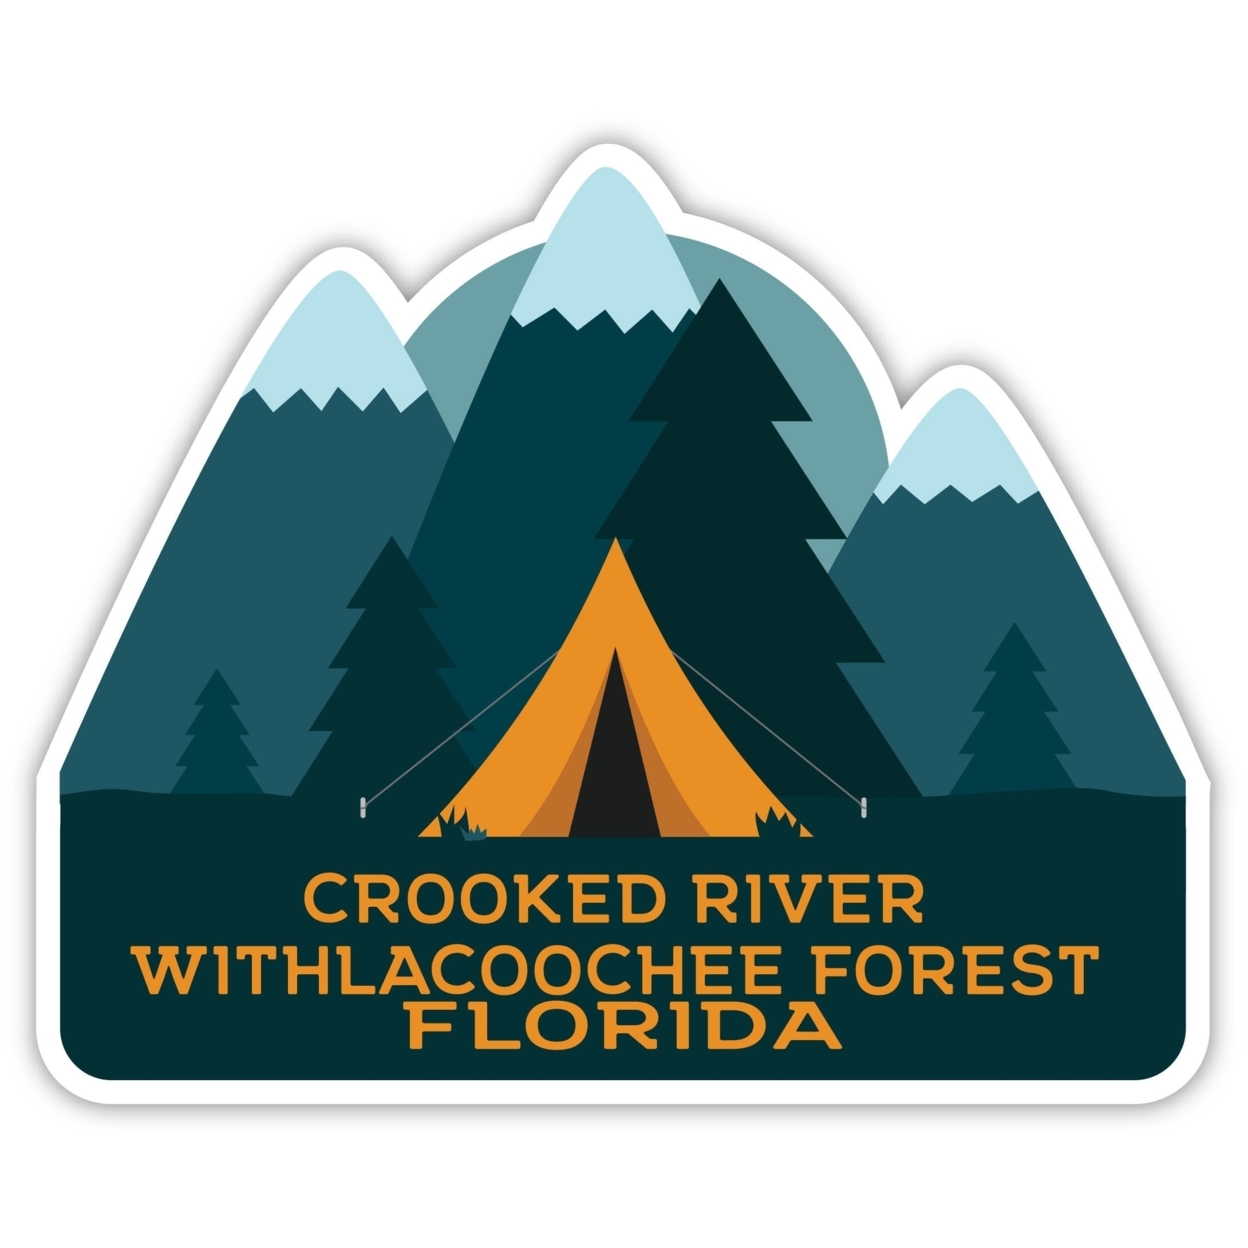 Crooked River Withlacoochee Forest Florida Souvenir Decorative Stickers (Choose Theme And Size) - 4-Pack, 12-Inch, Tent